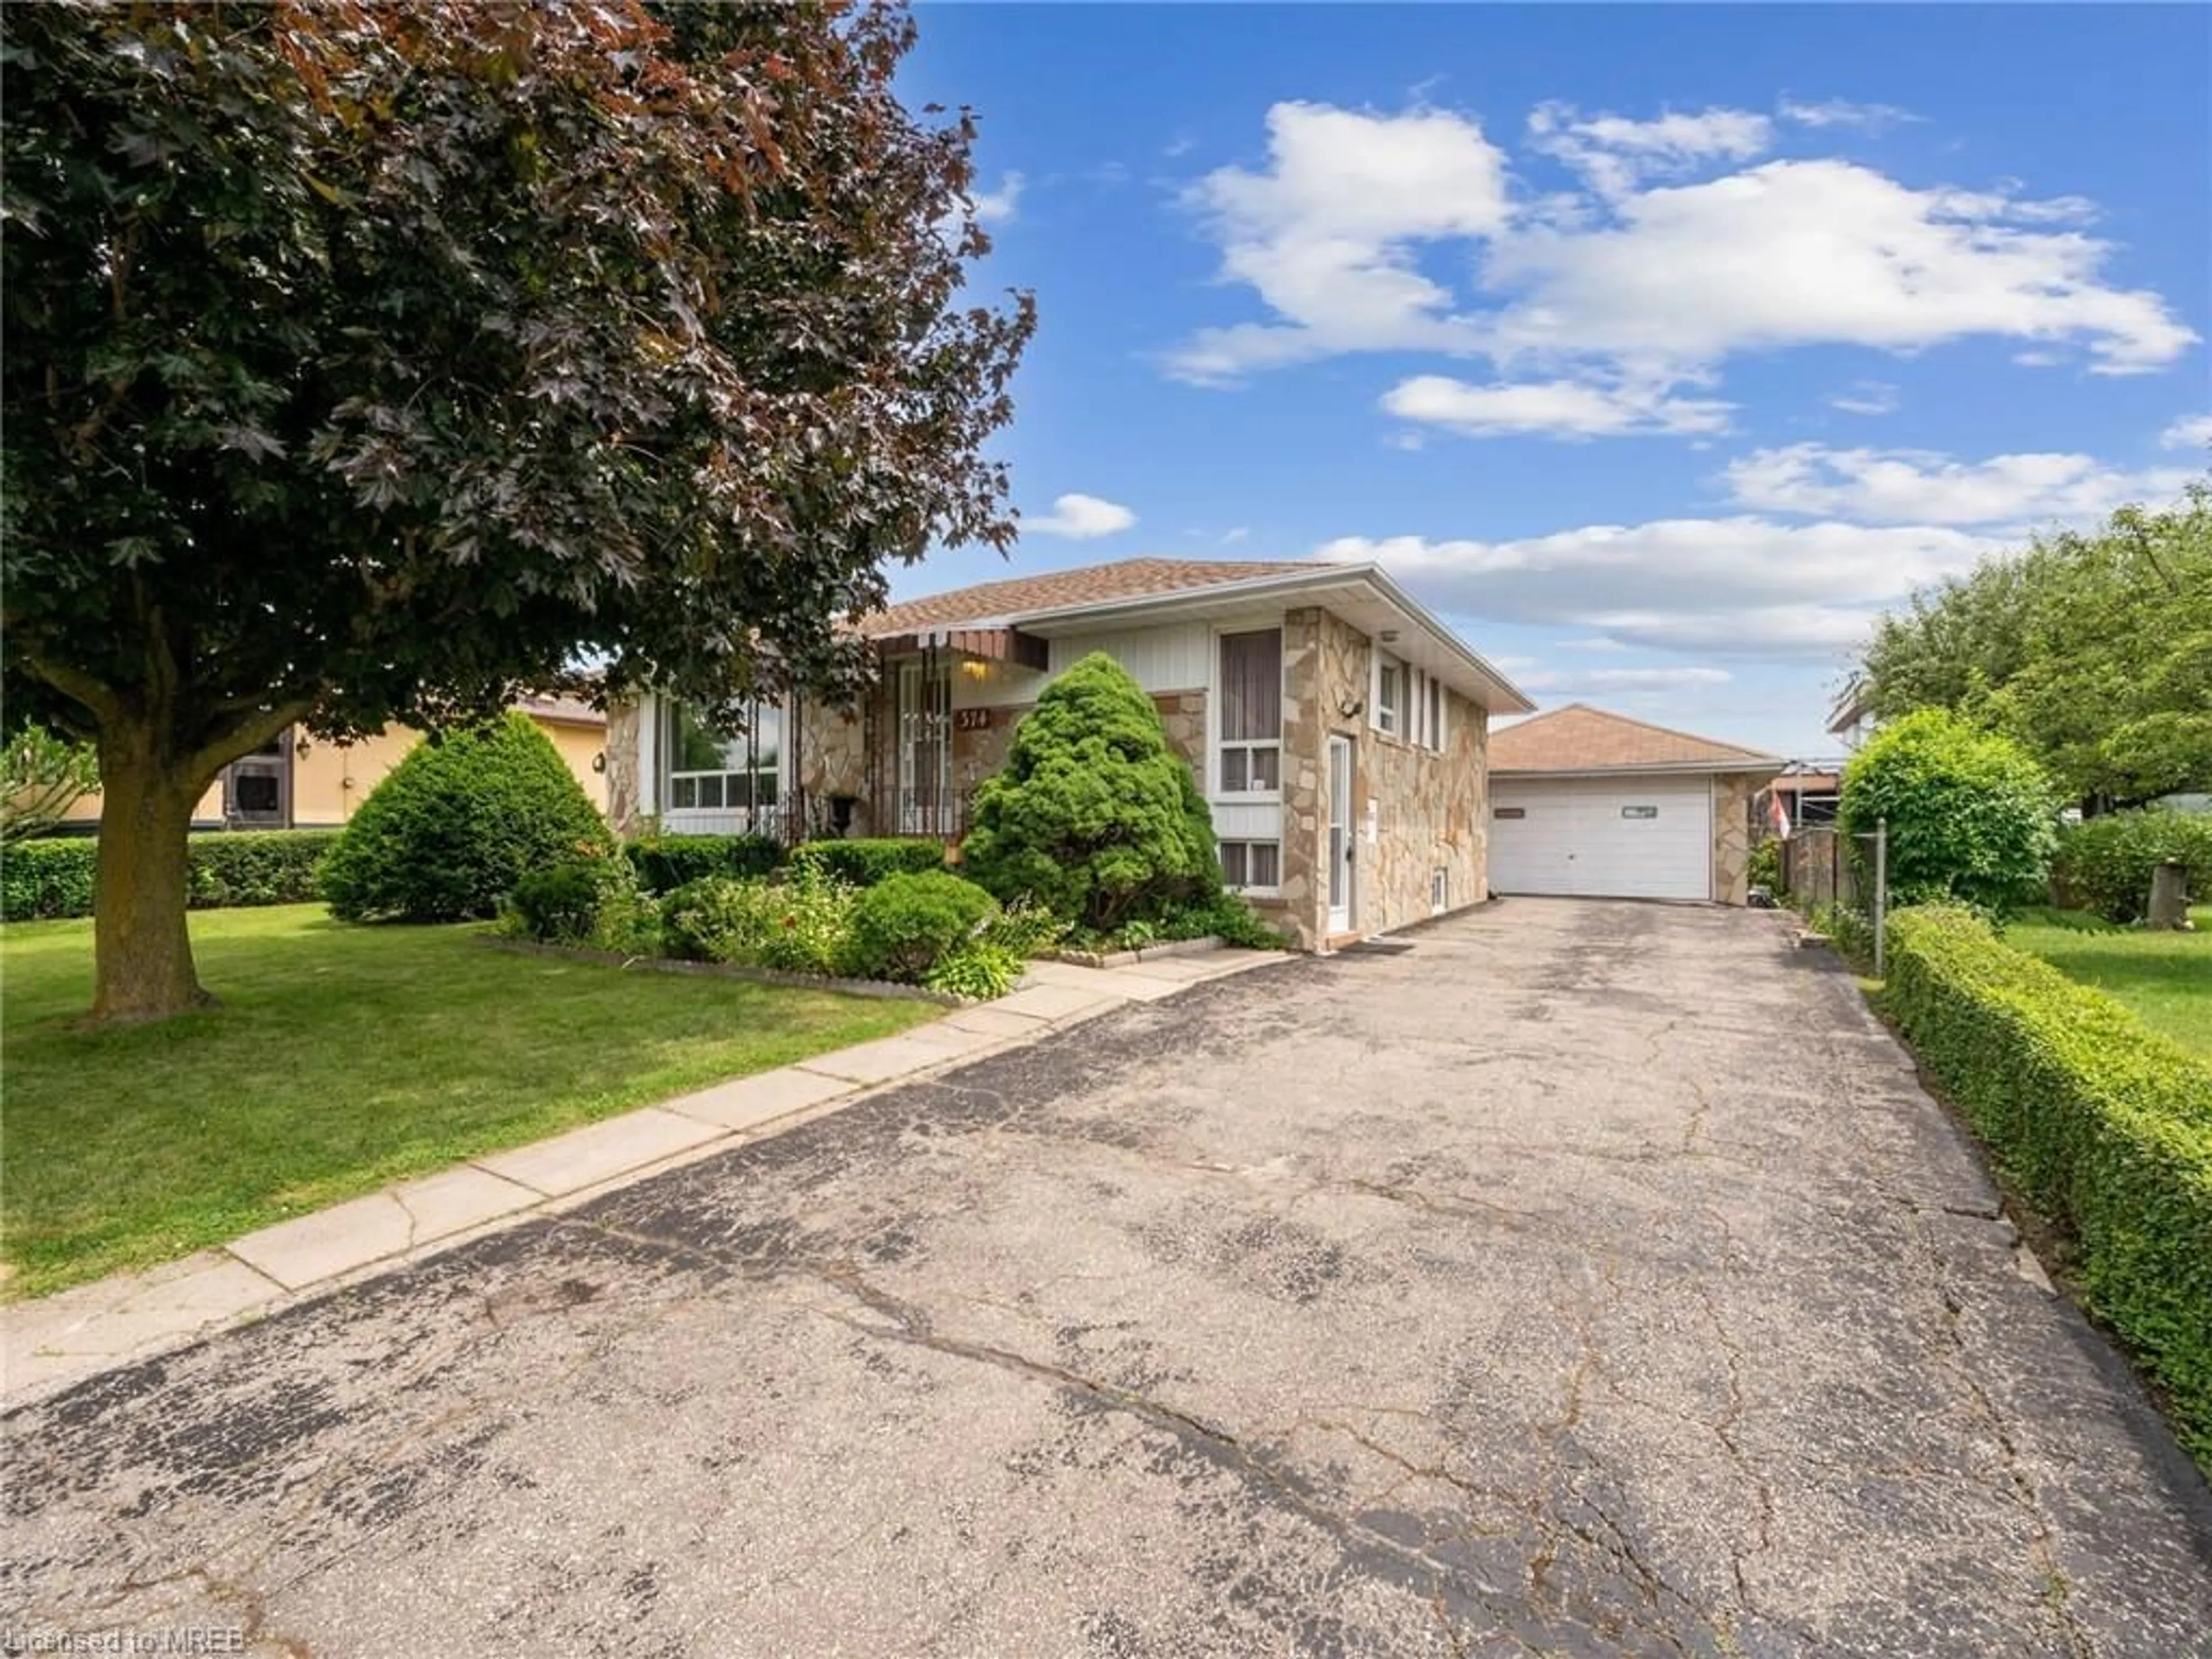 Frontside or backside of a home for 374 Wentworth St, Oakville Ontario L6K 1X2